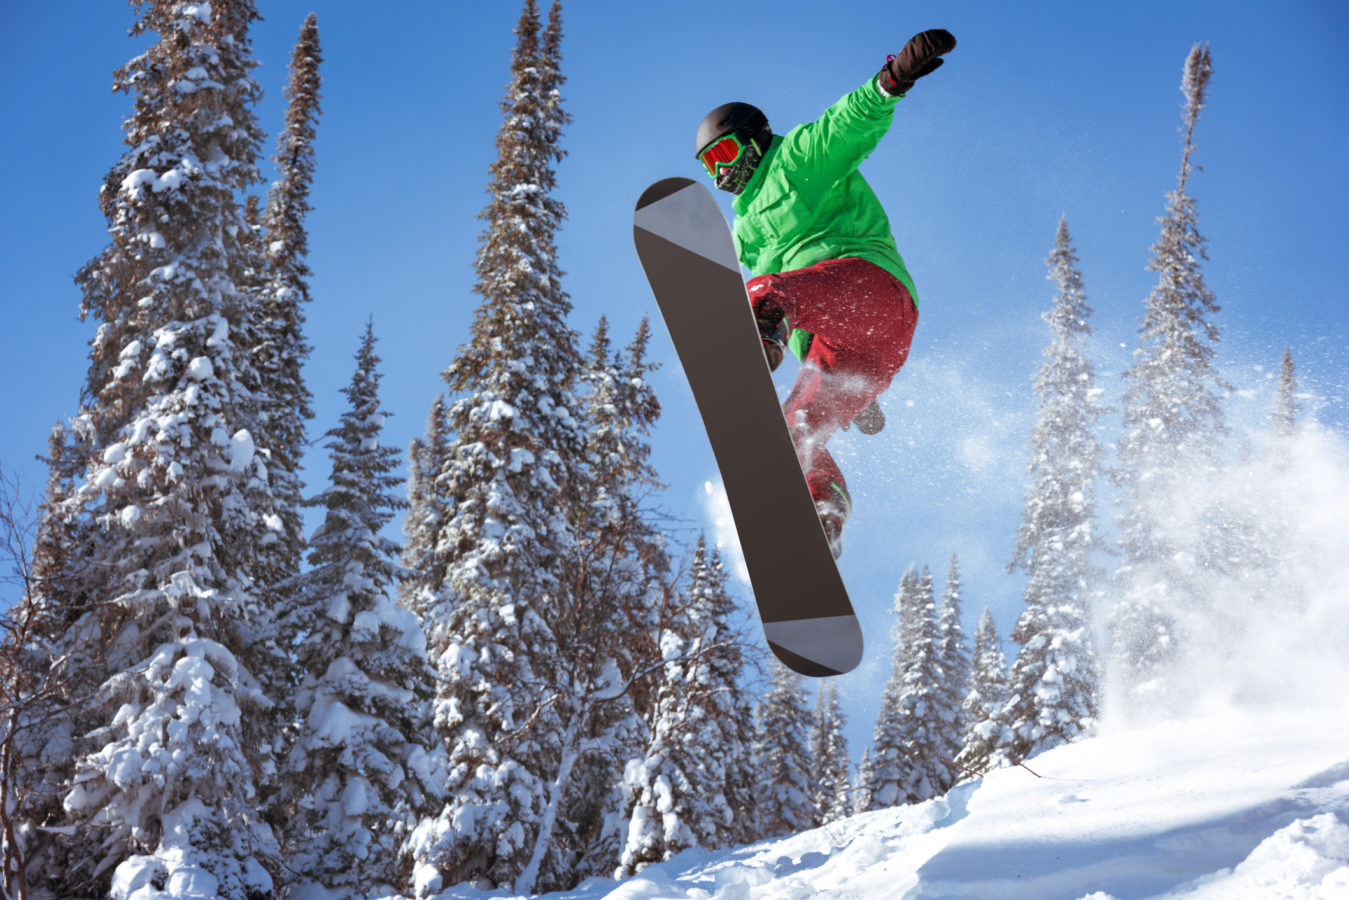 Winter Sports Safety Tips